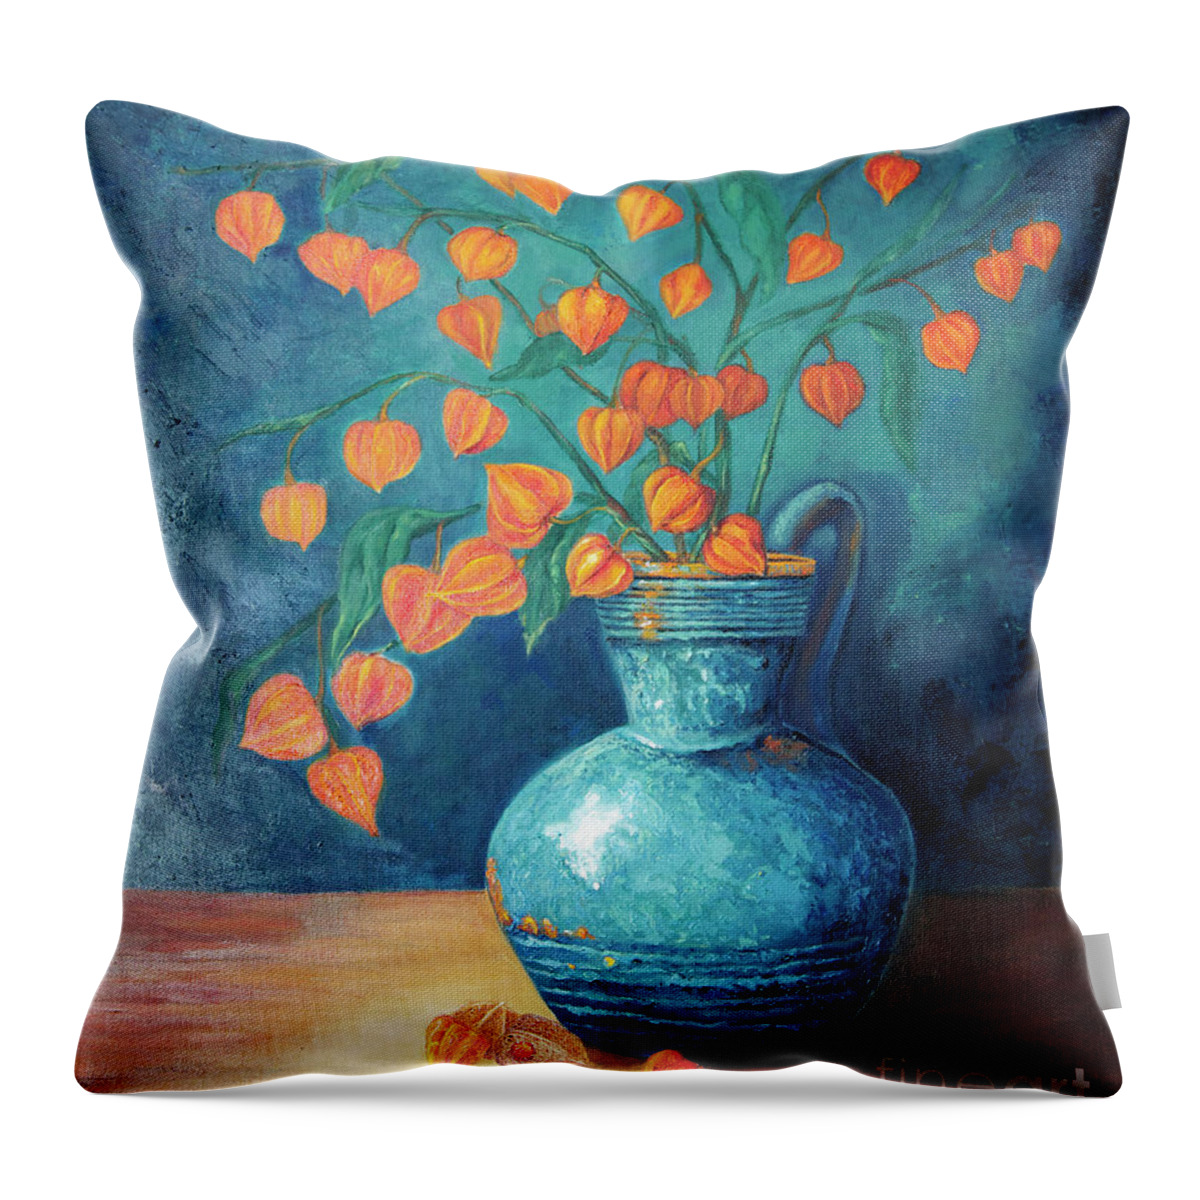 Still Life Throw Pillow featuring the painting Chinese Lanterns by Portraits By NC